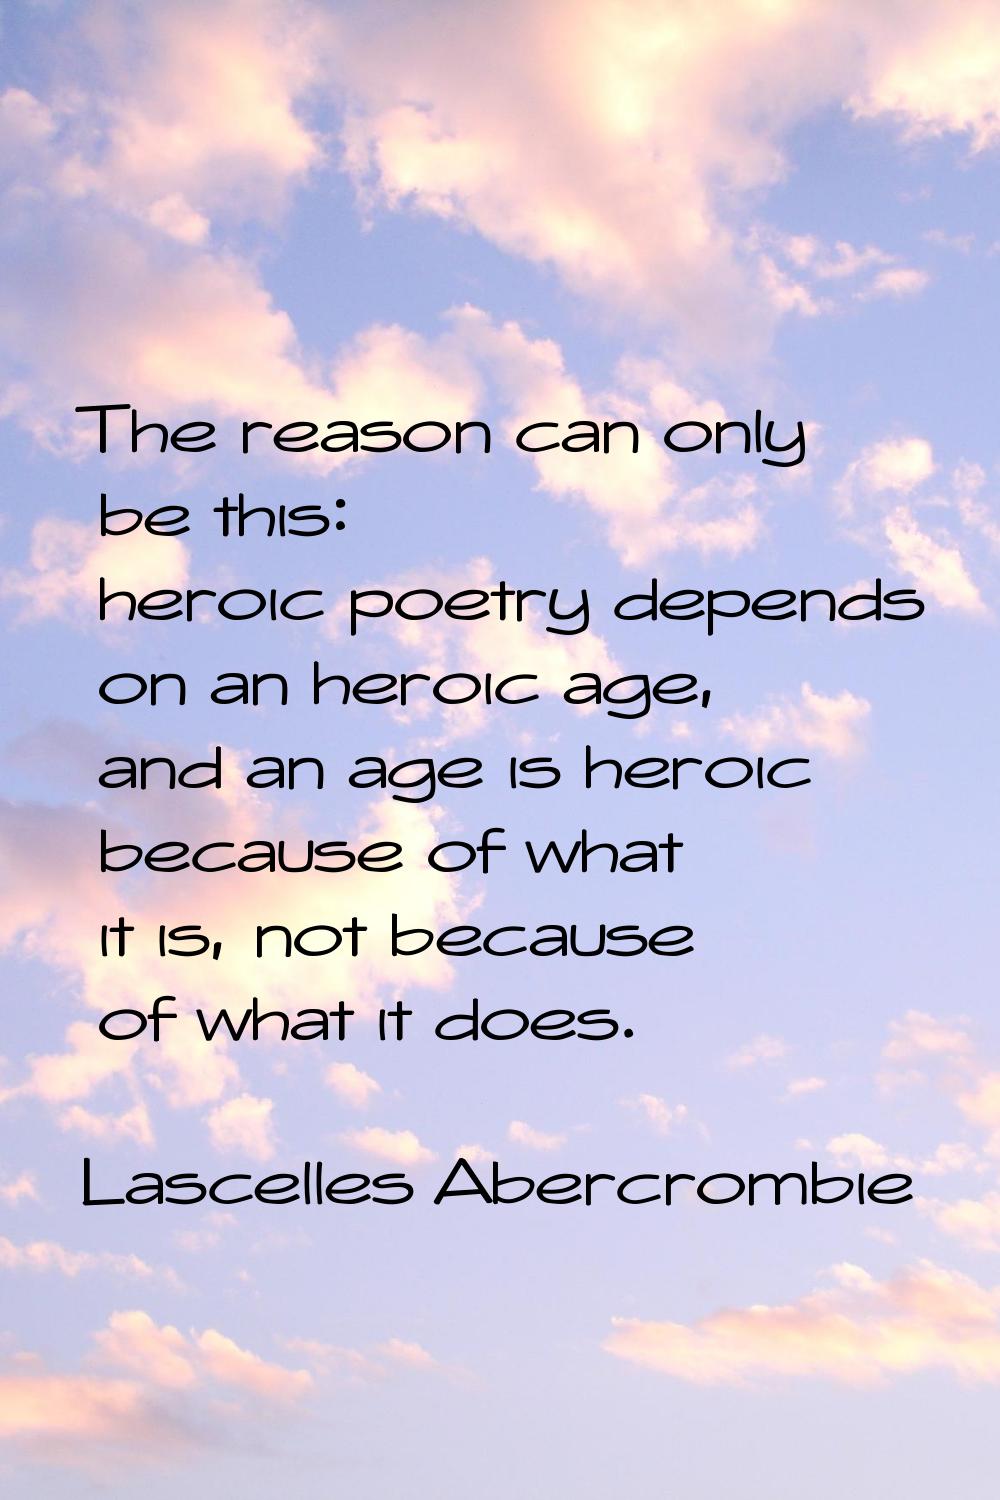 The reason can only be this: heroic poetry depends on an heroic age, and an age is heroic because o